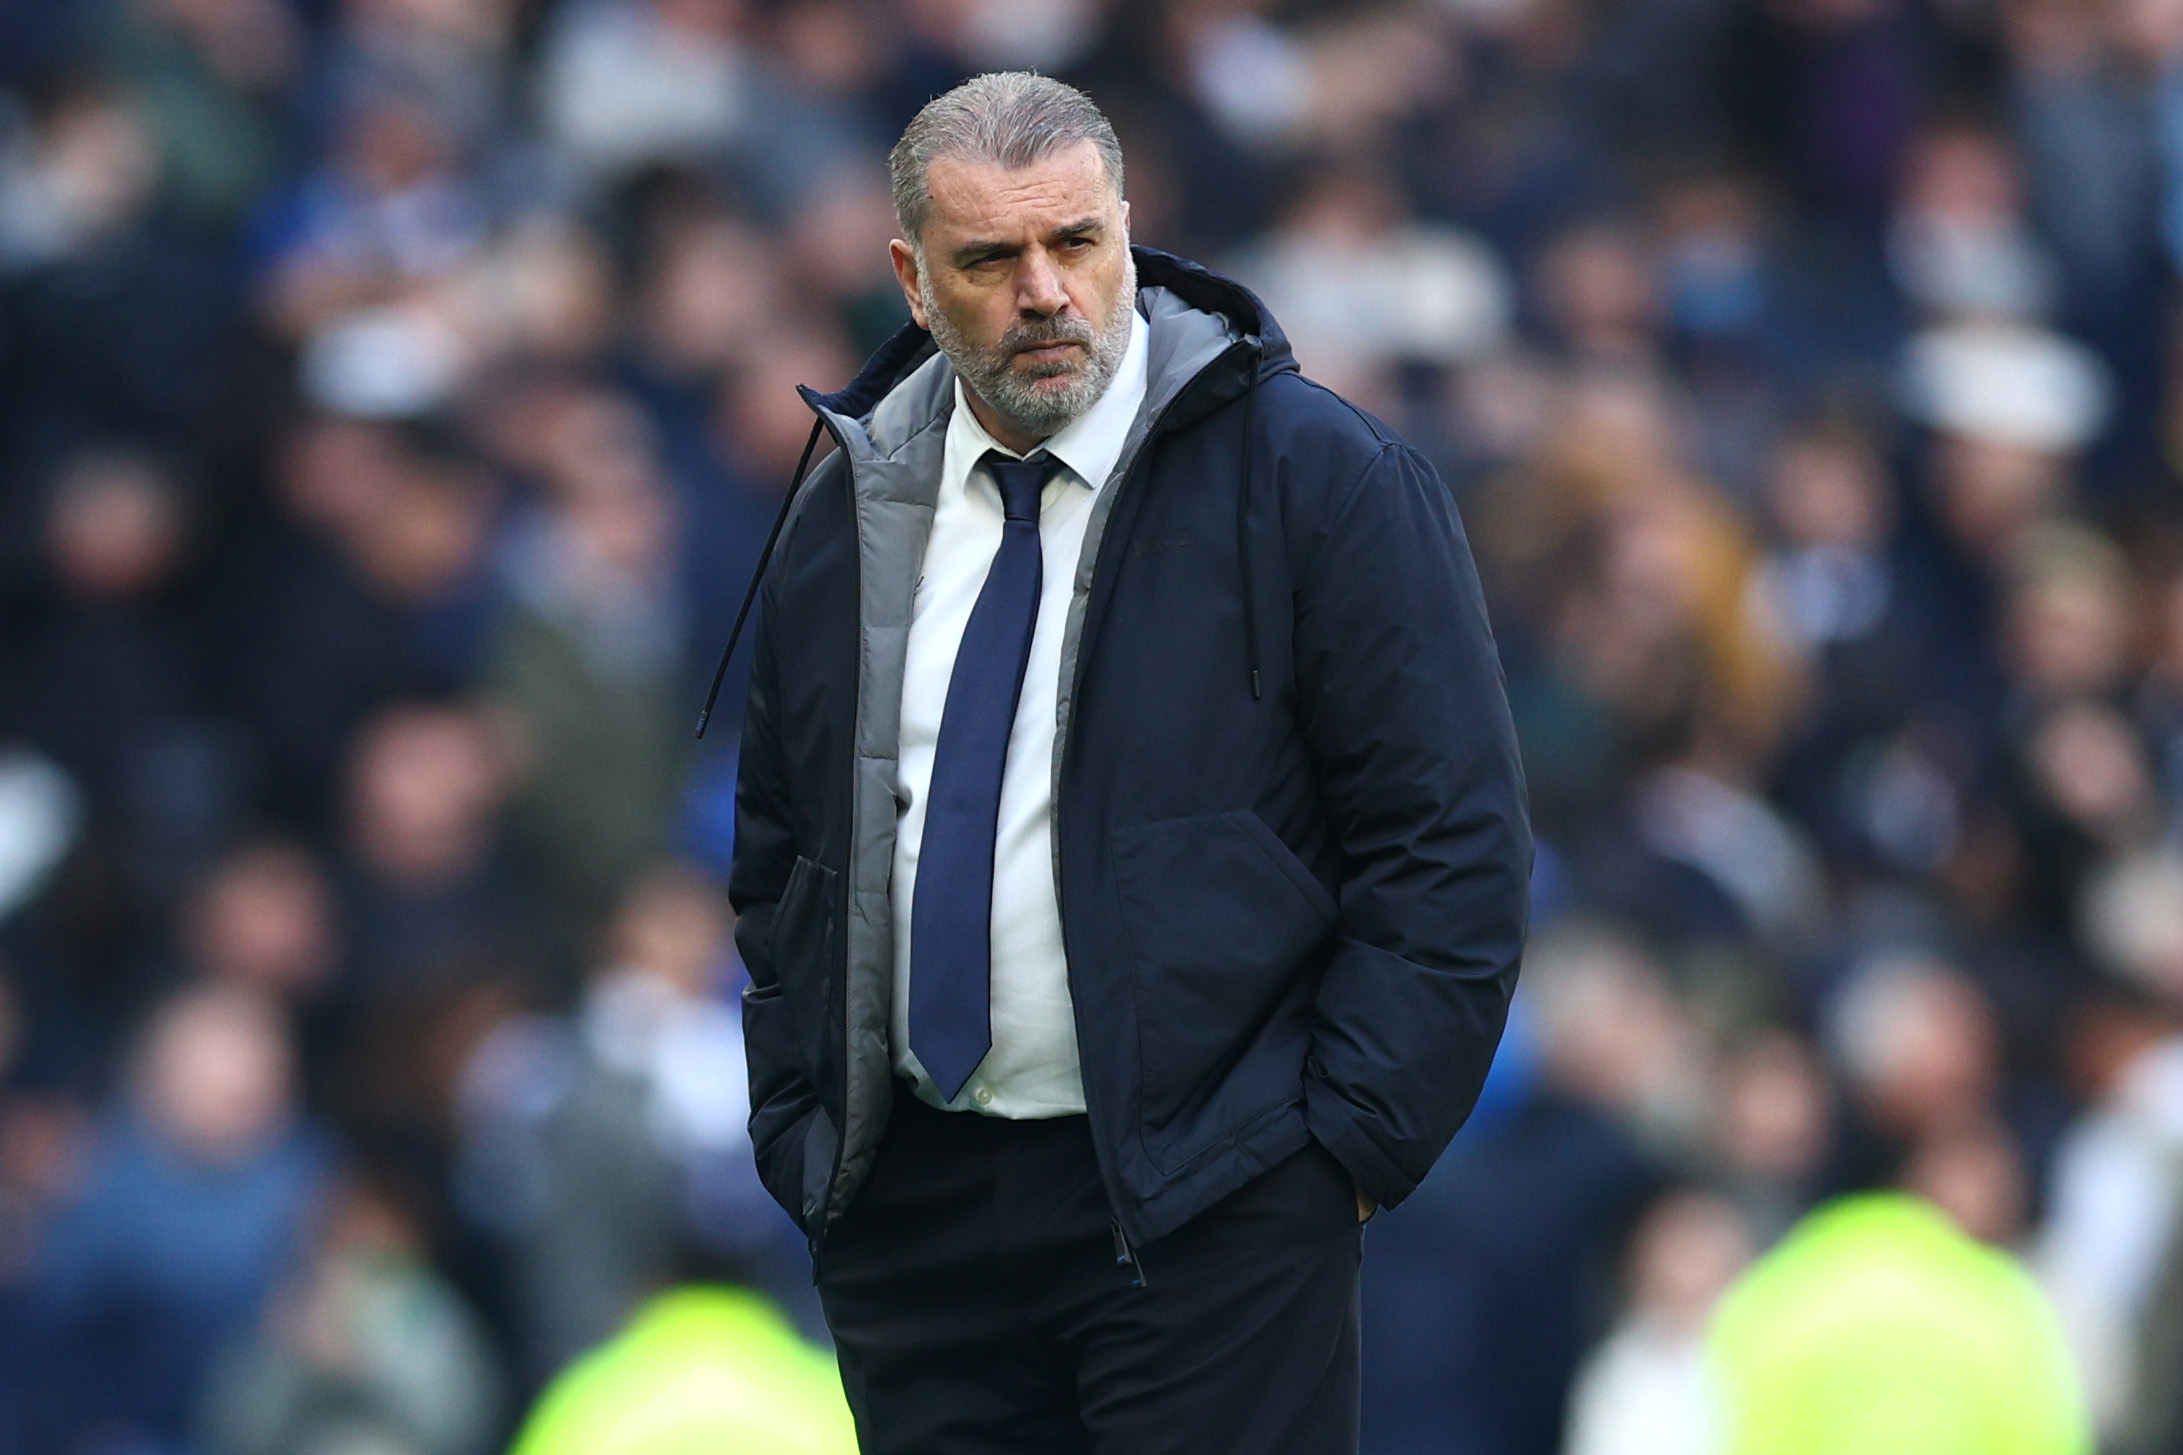 Ange Postecoglou will be under pressure from many Tottenham fans to... lose to Man City next week